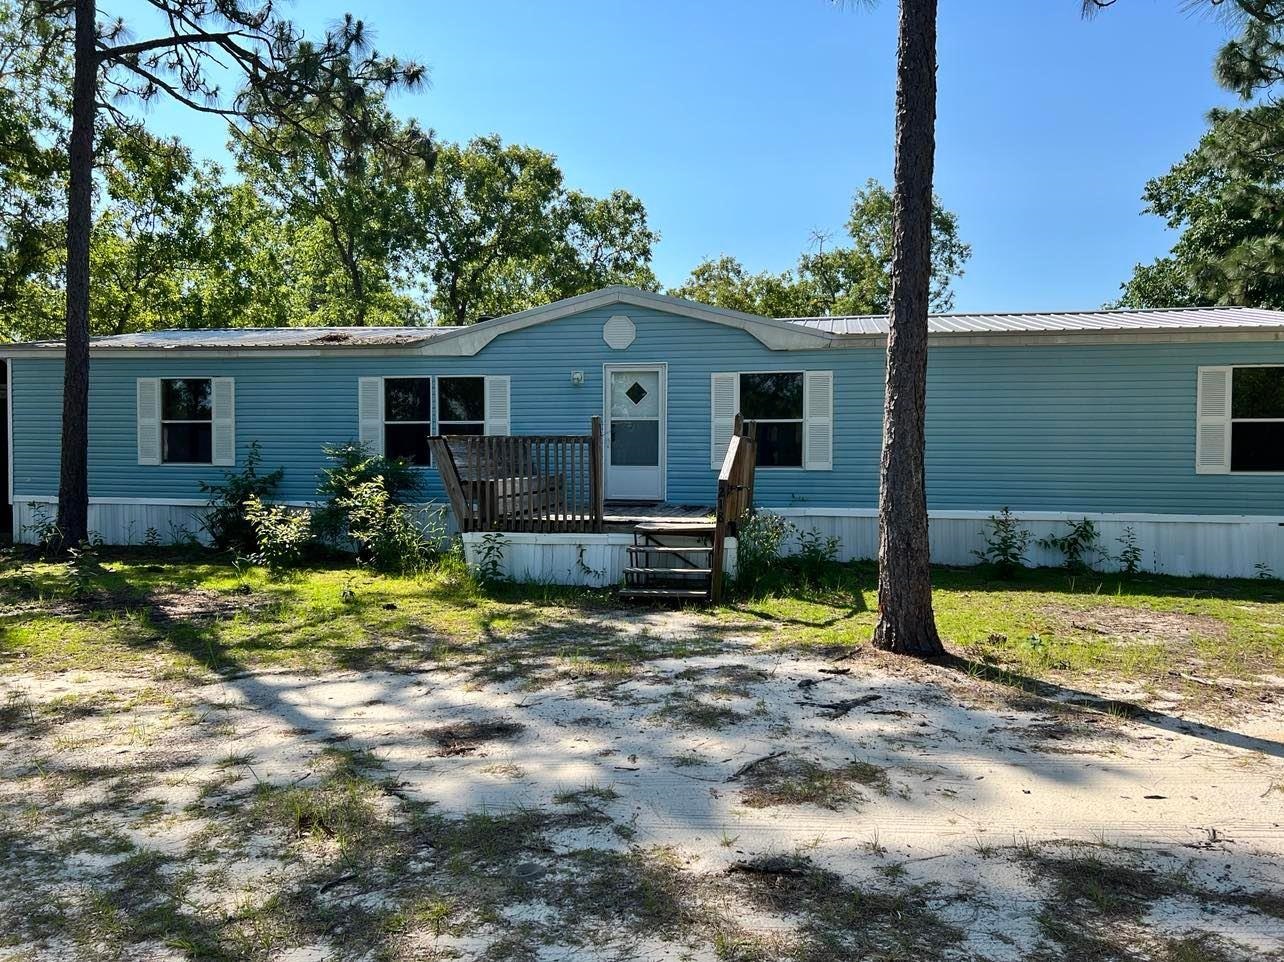 Charming 3br/2ba mobile home on a little over 1 acre of land.  Minutes away from the public boat ramp, Country Boy's Restaurant, &  Ingram's Marina. This home is fun in the sun, minutes away from Lake Talquin!